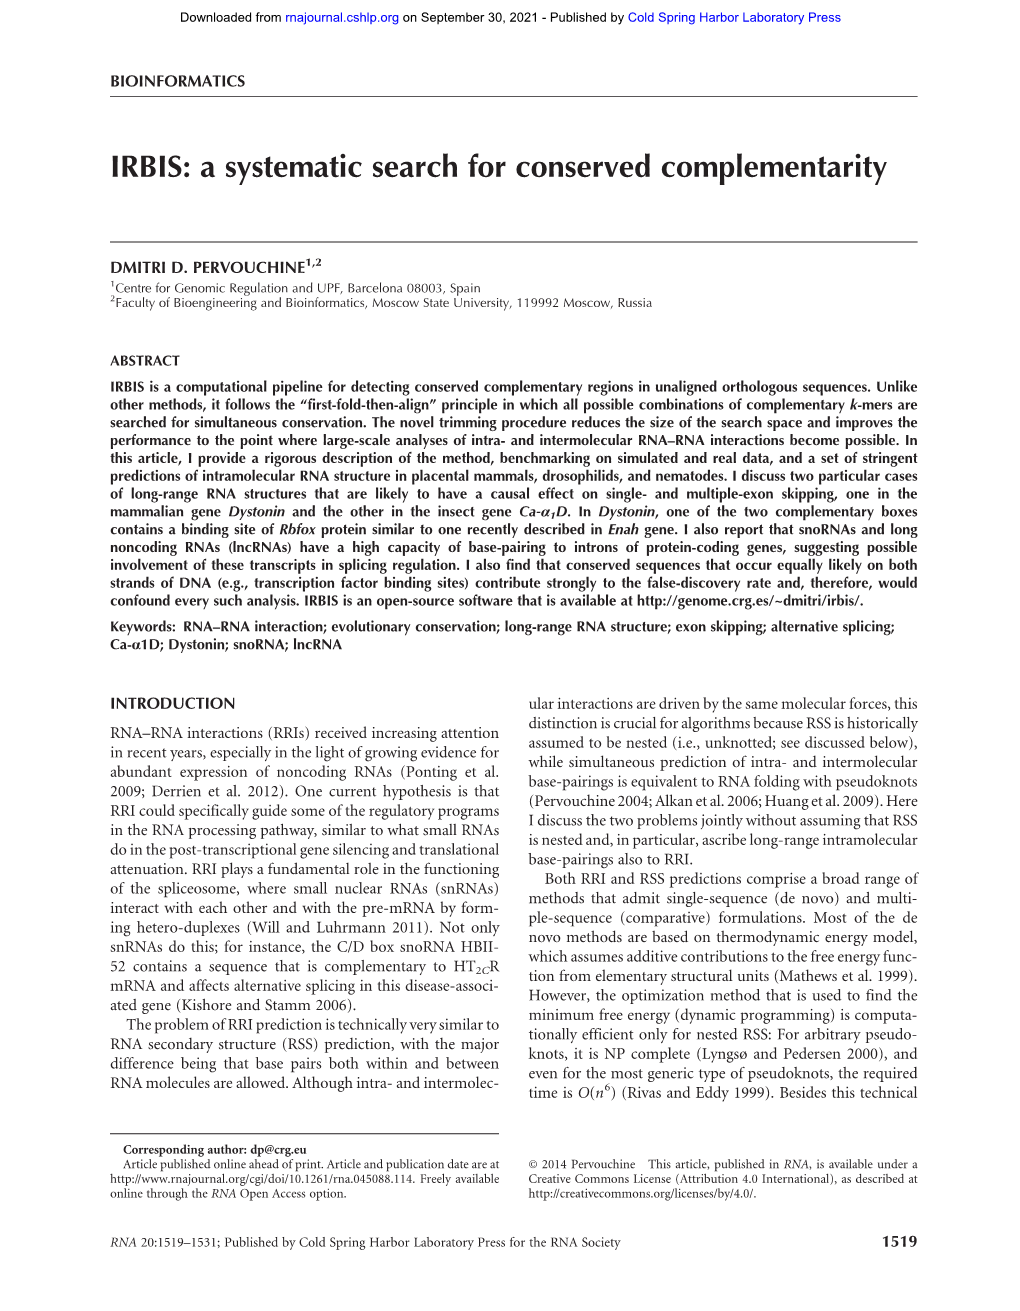 IRBIS: a Systematic Search for Conserved Complementarity